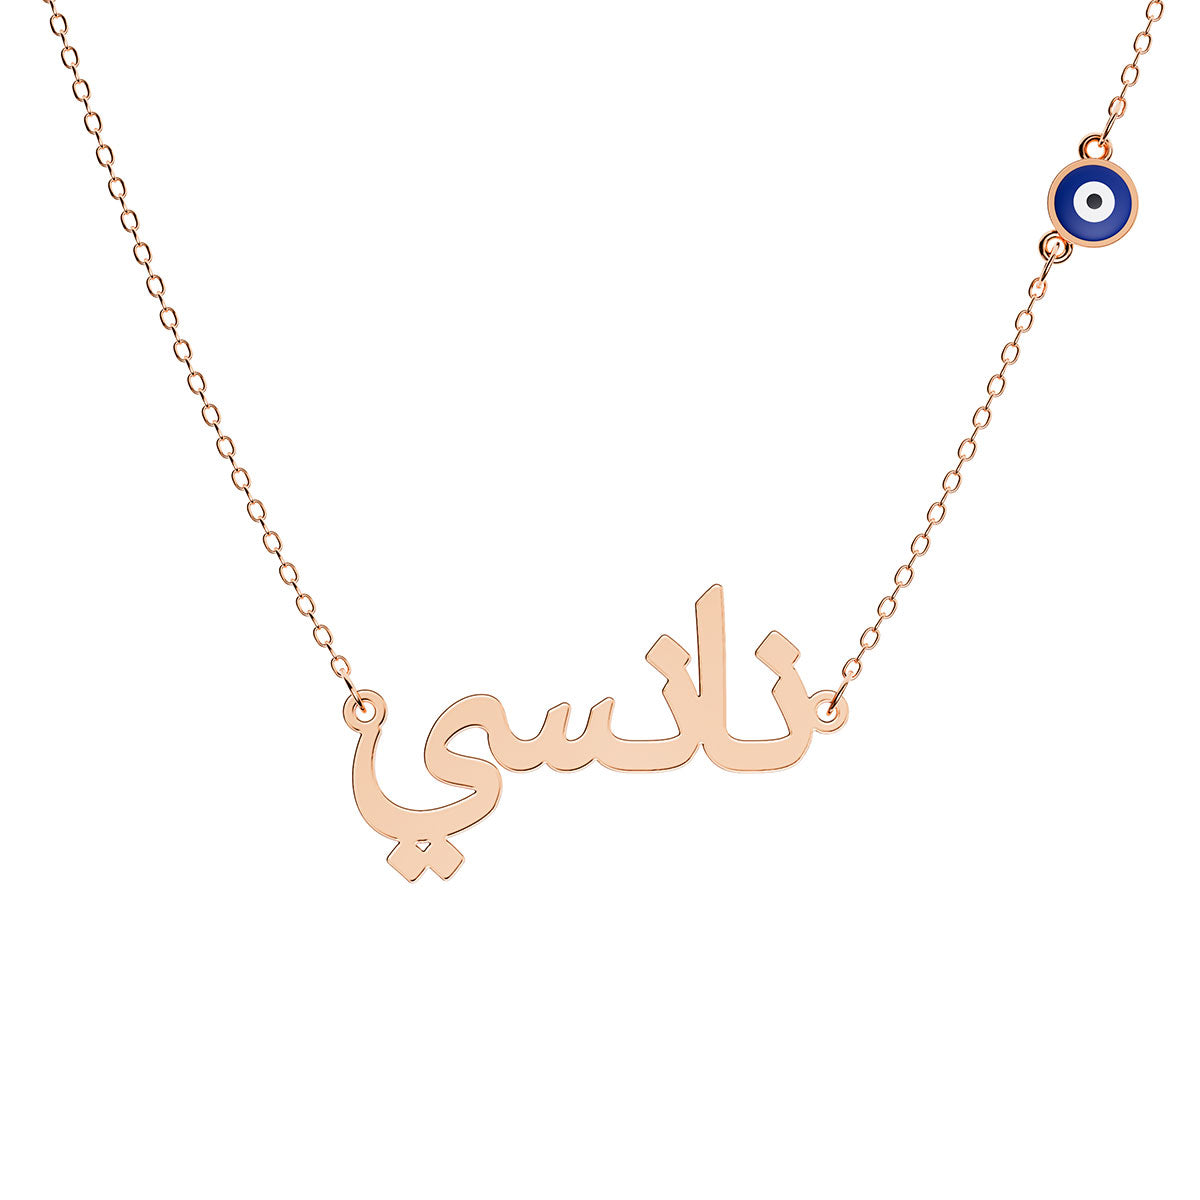 Arabic Personalized Name Necklace With Round Evil Eye Chain Charm